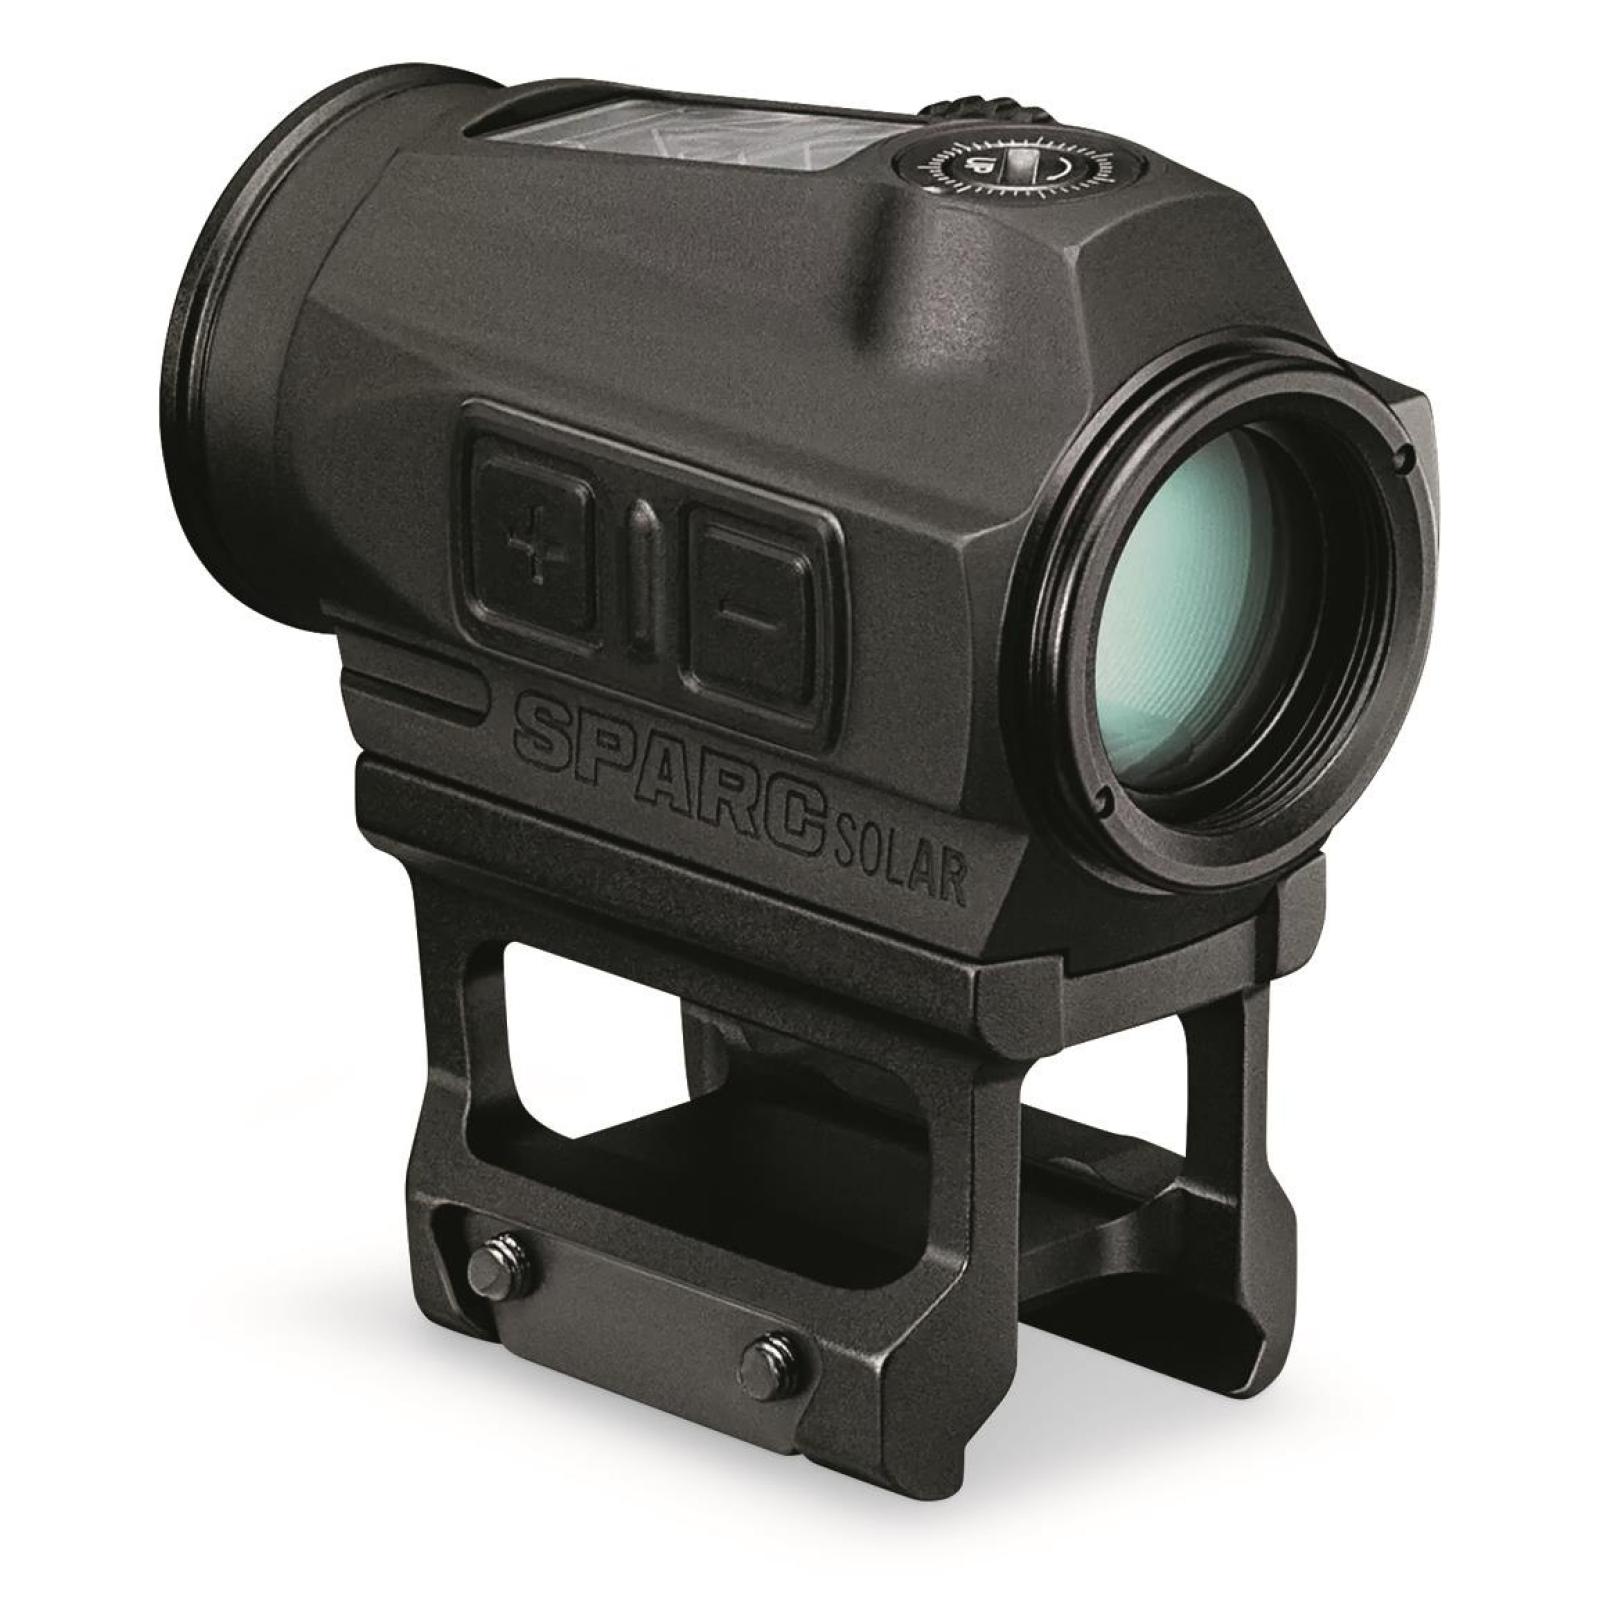 Vortex Sparc Solar Red Dot Sight, 2 MOA Red Dot Reticle